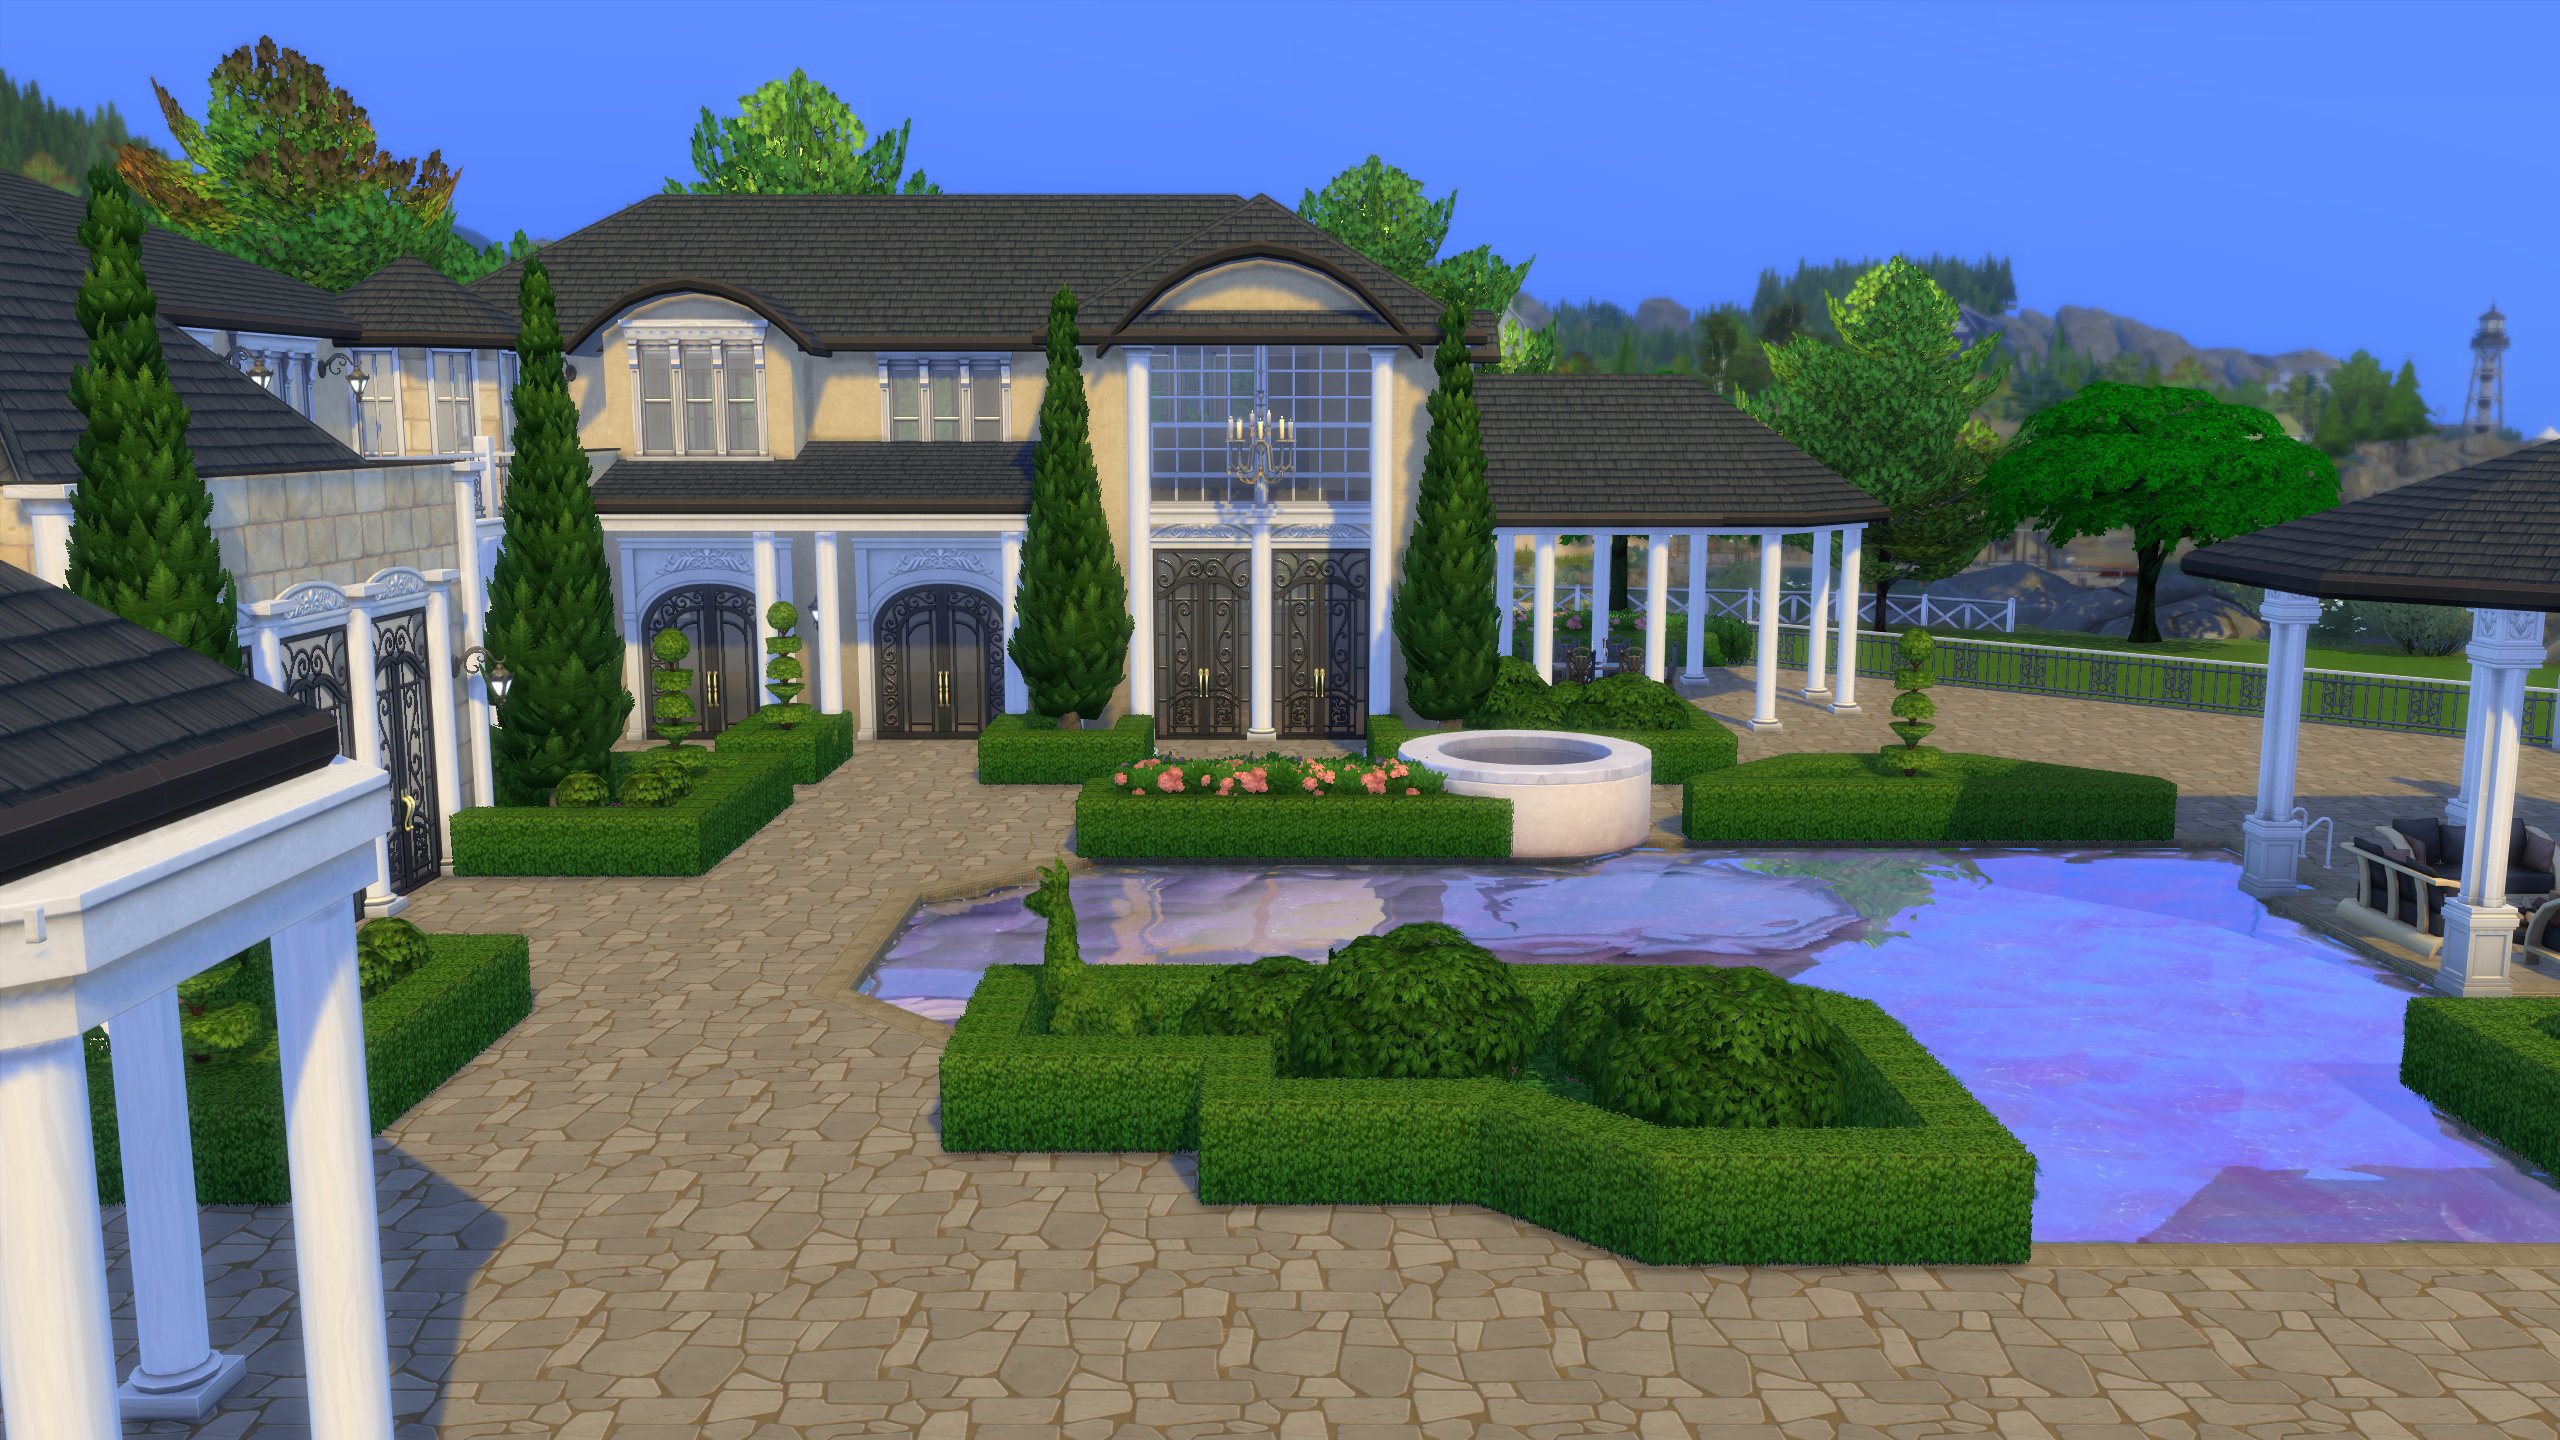 Building Jeffree Star's Hidden Hills Mansion in The Sims 4